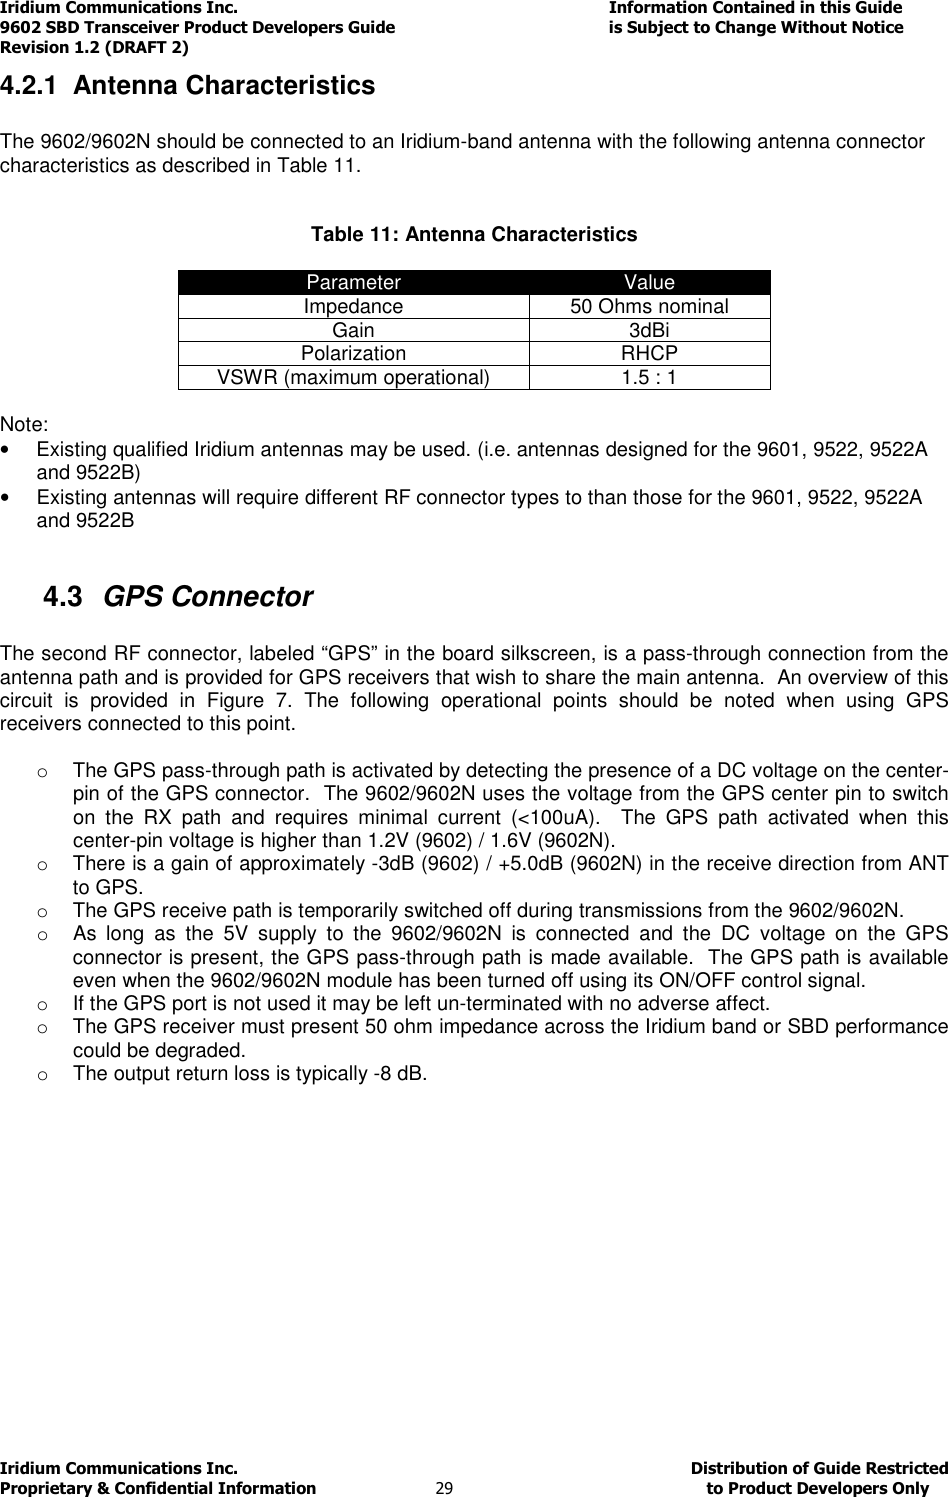 Iridium Communications Inc.                                      Information Contained in this Guide  9602 SBD Transceiver Product Developers Guide                                             is Subject to Change Without Notice  Revision 1.2 (DRAFT 2) Iridium Communications Inc.                                           Distribution of Guide Restricted Proprietary &amp; Confidential Information                         29                                                  to Product Developers Only           4.2.1  Antenna Characteristics  The 9602/9602N should be connected to an Iridium-band antenna with the following antenna connector characteristics as described in Table 11.   Table 11: Antenna Characteristics  Parameter  Value Impedance  50 Ohms nominal Gain  3dBi Polarization  RHCP VSWR (maximum operational)  1.5 : 1  Note: •  Existing qualified Iridium antennas may be used. (i.e. antennas designed for the 9601, 9522, 9522A and 9522B) •  Existing antennas will require different RF connector types to than those for the 9601, 9522, 9522A and 9522B  4.3  GPS Connector  The second RF connector, labeled “GPS” in the board silkscreen, is a pass-through connection from the antenna path and is provided for GPS receivers that wish to share the main antenna.  An overview of this circuit  is  provided  in  Figure  7.  The  following  operational  points  should  be  noted  when  using  GPS receivers connected to this point.    o  The GPS pass-through path is activated by detecting the presence of a DC voltage on the center-pin of the GPS connector.  The 9602/9602N uses the voltage from the GPS center pin to switch on  the  RX  path  and  requires  minimal  current  (&lt;100uA).    The  GPS  path  activated  when  this center-pin voltage is higher than 1.2V (9602) / 1.6V (9602N). o  There is a gain of approximately -3dB (9602) / +5.0dB (9602N) in the receive direction from ANT to GPS. o  The GPS receive path is temporarily switched off during transmissions from the 9602/9602N. o  As  long  as  the  5V  supply  to  the  9602/9602N  is  connected  and  the  DC  voltage  on  the  GPS connector is present, the GPS pass-through path is made available.  The GPS path is available even when the 9602/9602N module has been turned off using its ON/OFF control signal. o  If the GPS port is not used it may be left un-terminated with no adverse affect. o  The GPS receiver must present 50 ohm impedance across the Iridium band or SBD performance could be degraded. o  The output return loss is typically -8 dB.             